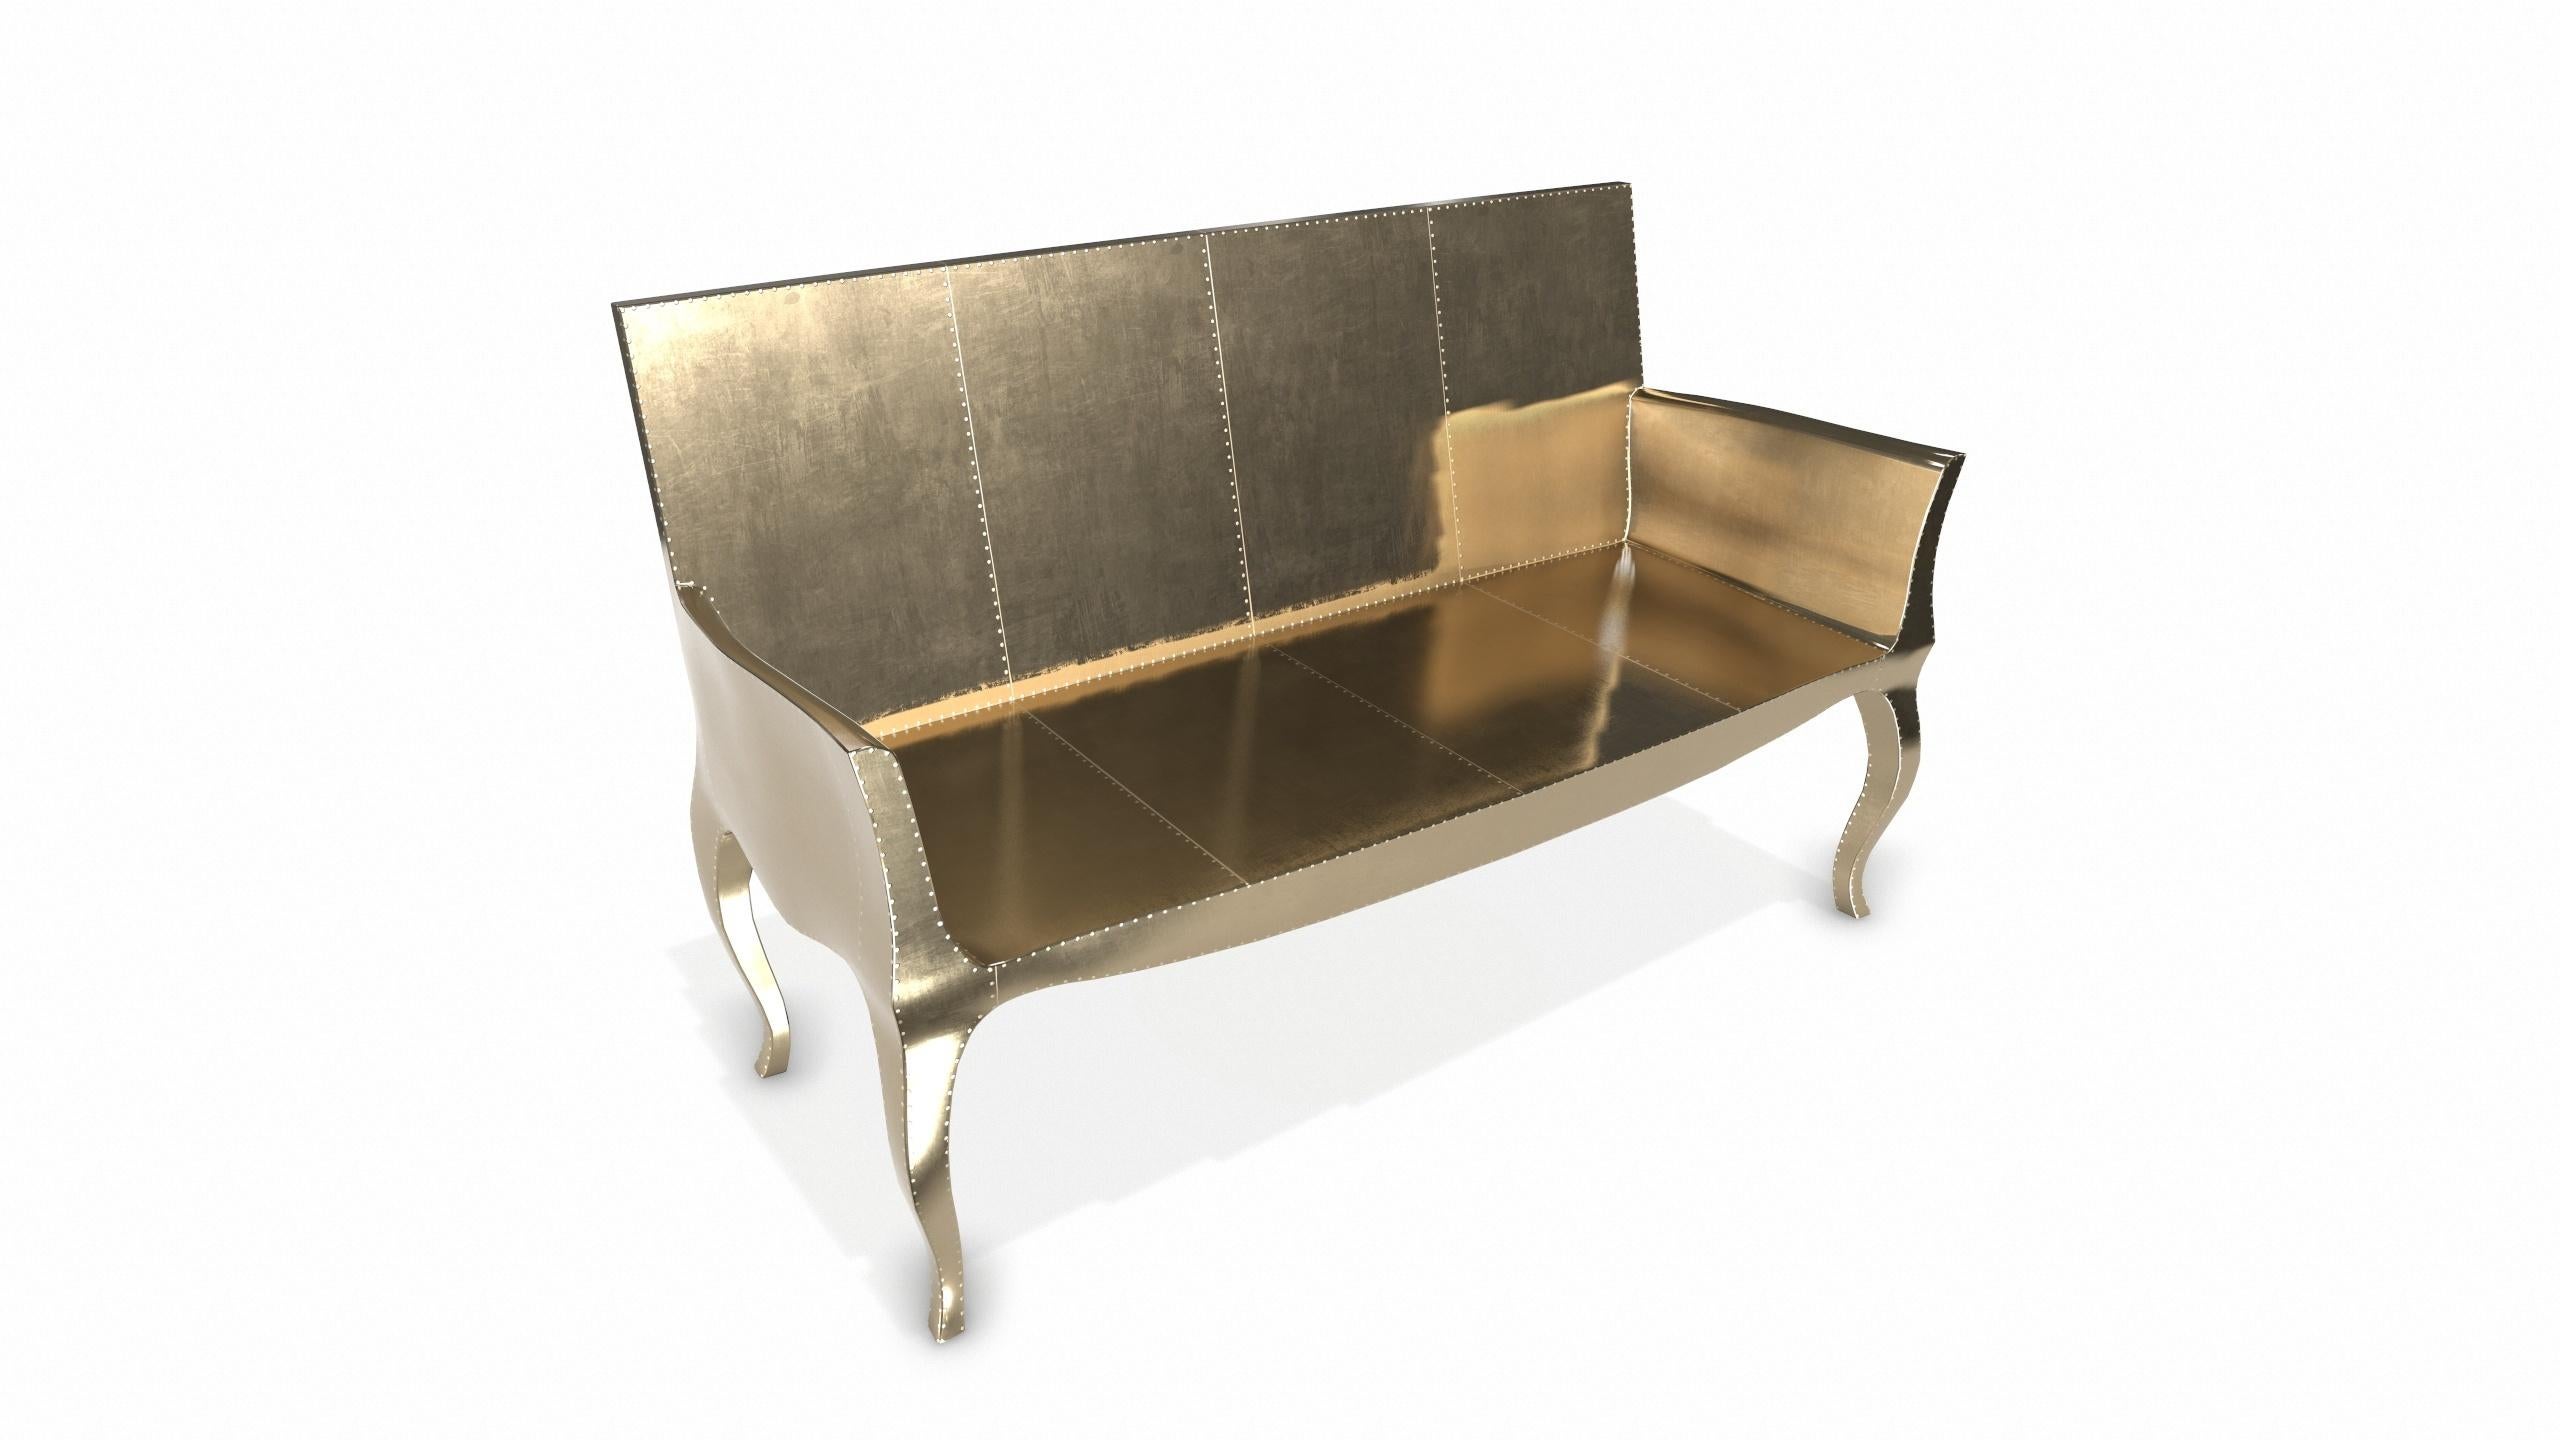 Louise Settee Art Deco Daybeds in Smooth Brass by Paul Mathieu for S Odegard For Sale 2